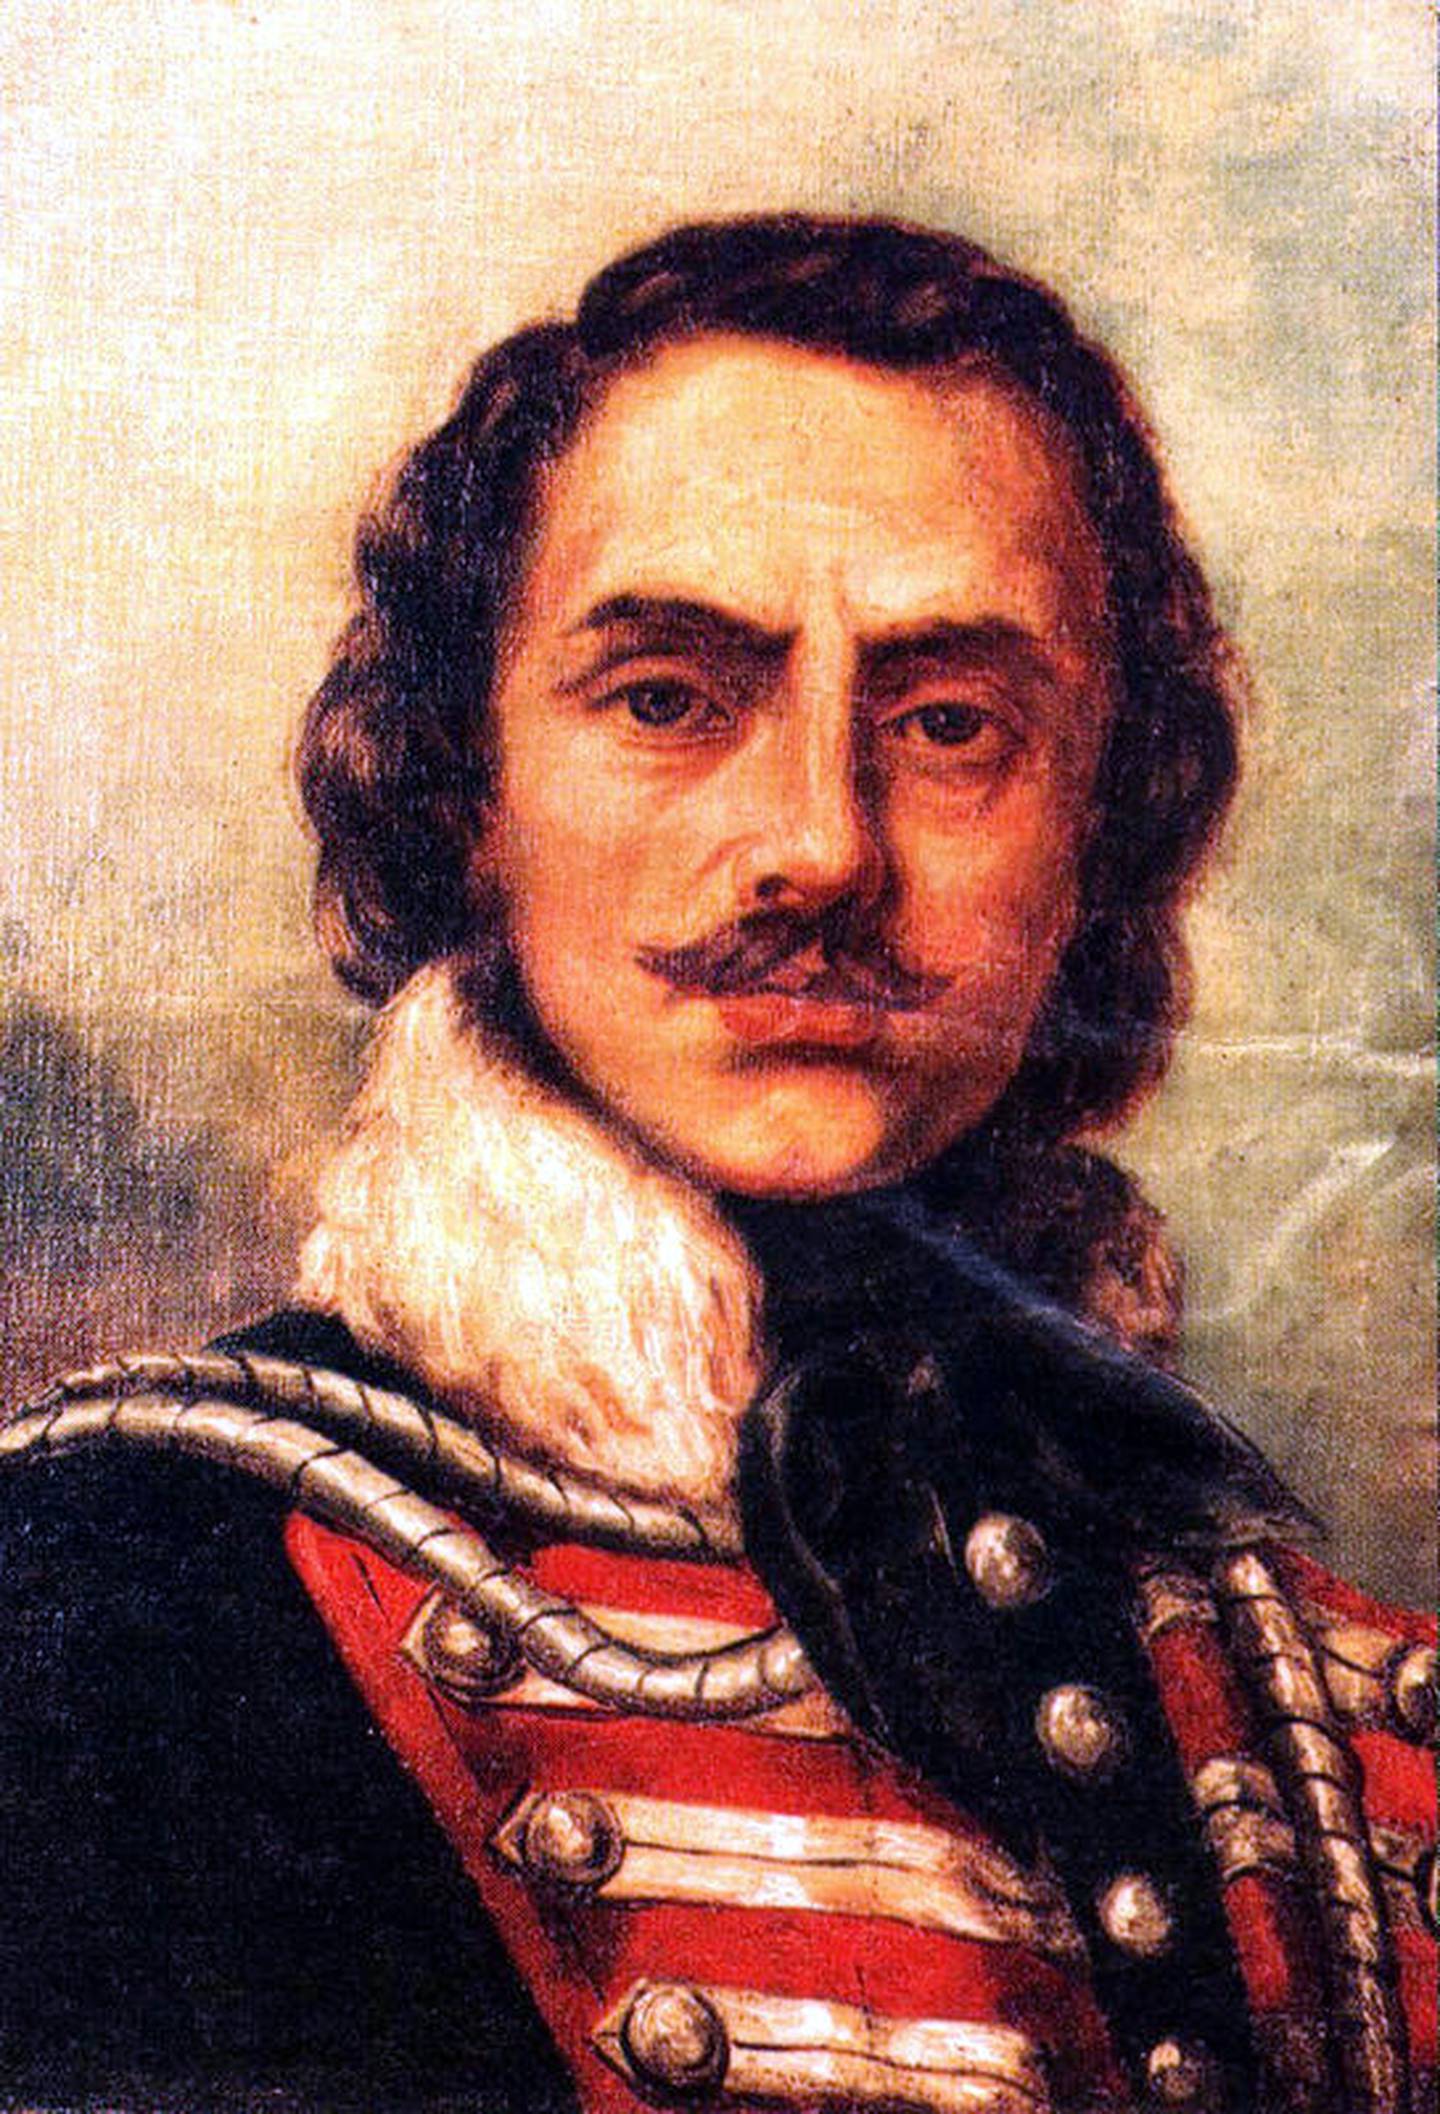 Casimir Pulaski was a member of Polish nobility who fled his homeland amid a failed uprising against Russian authority. He was introduced in France to American diplomat Benjamin Franklin, who sent him to the Revolutionary War cause.